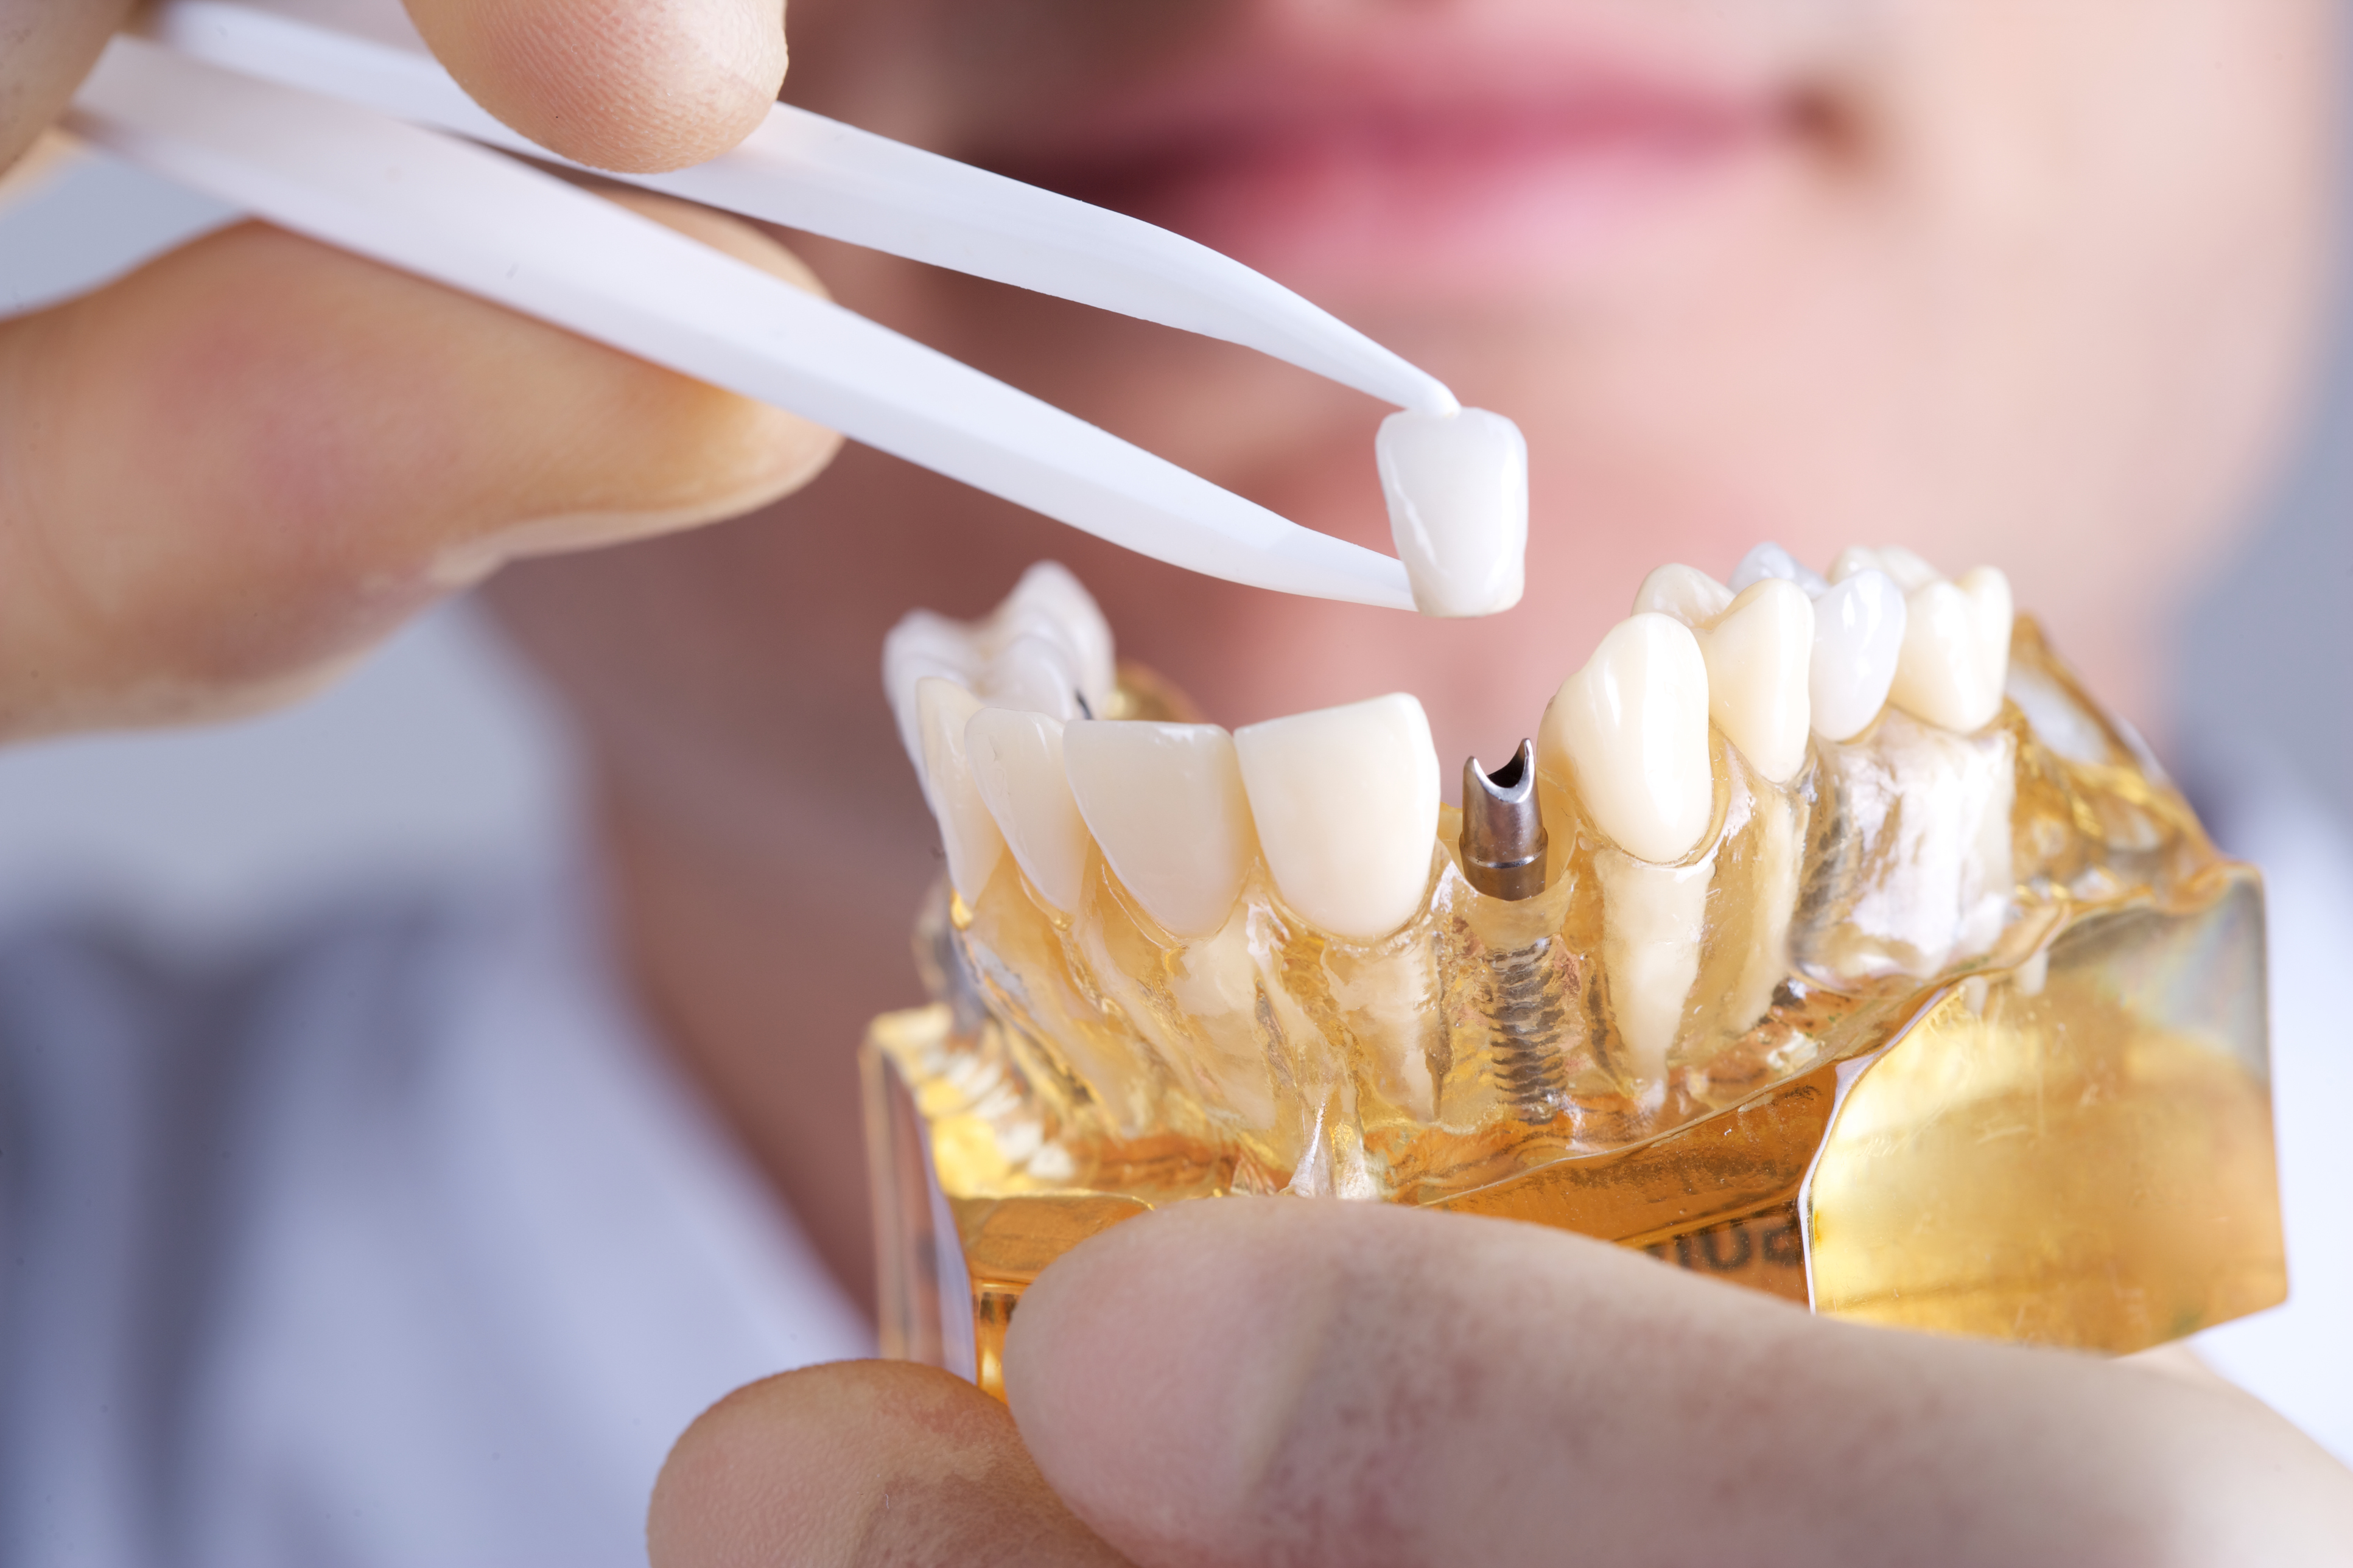 5 After Care Tips for Your Dental Implants - Forest Lake Family Dental